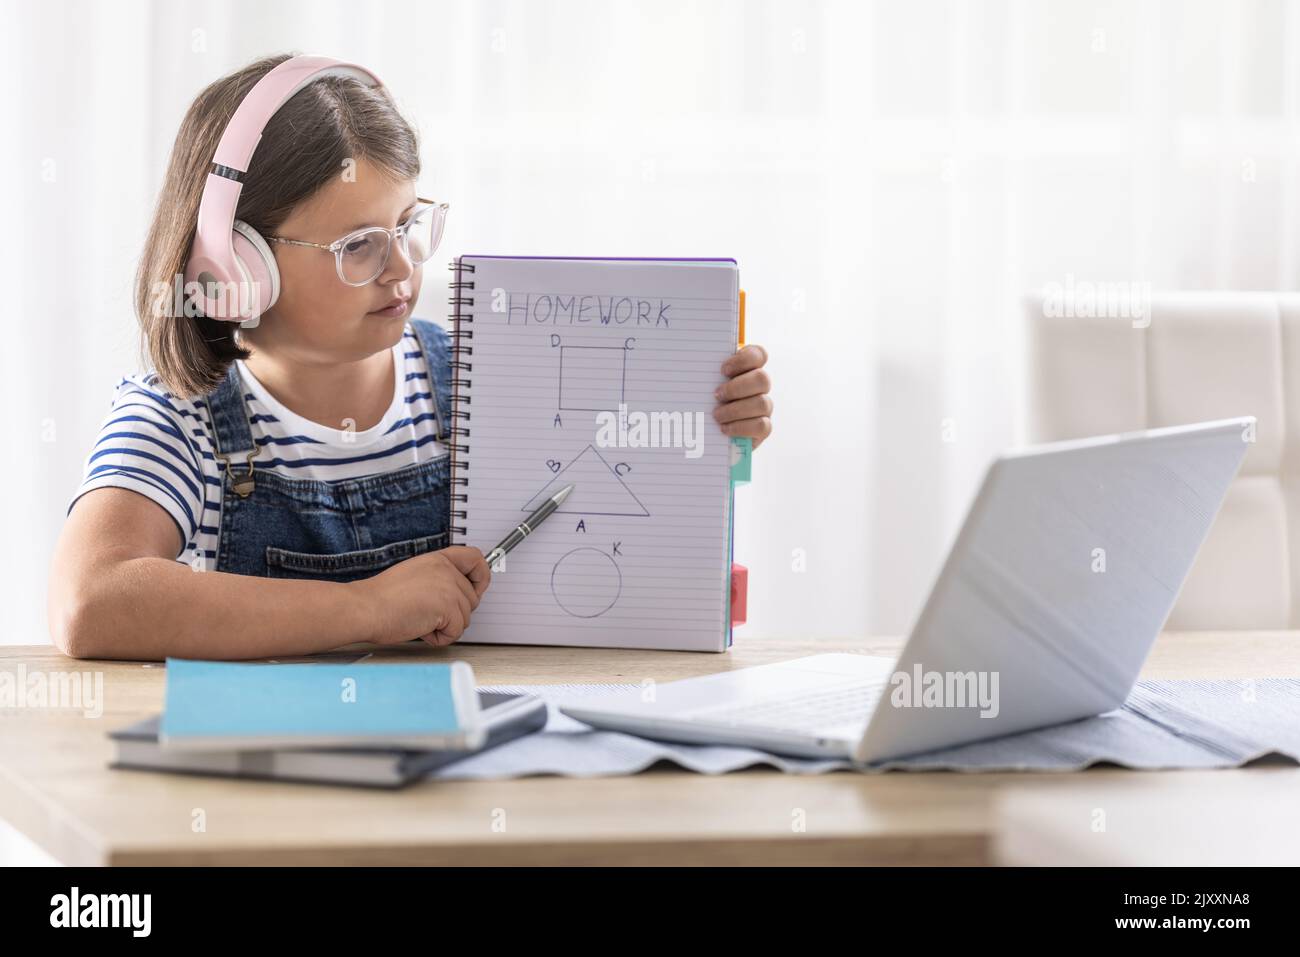 Schoolgirl in glasses and headphones shows her homework to the teacher during an online class via computer. Stock Photo